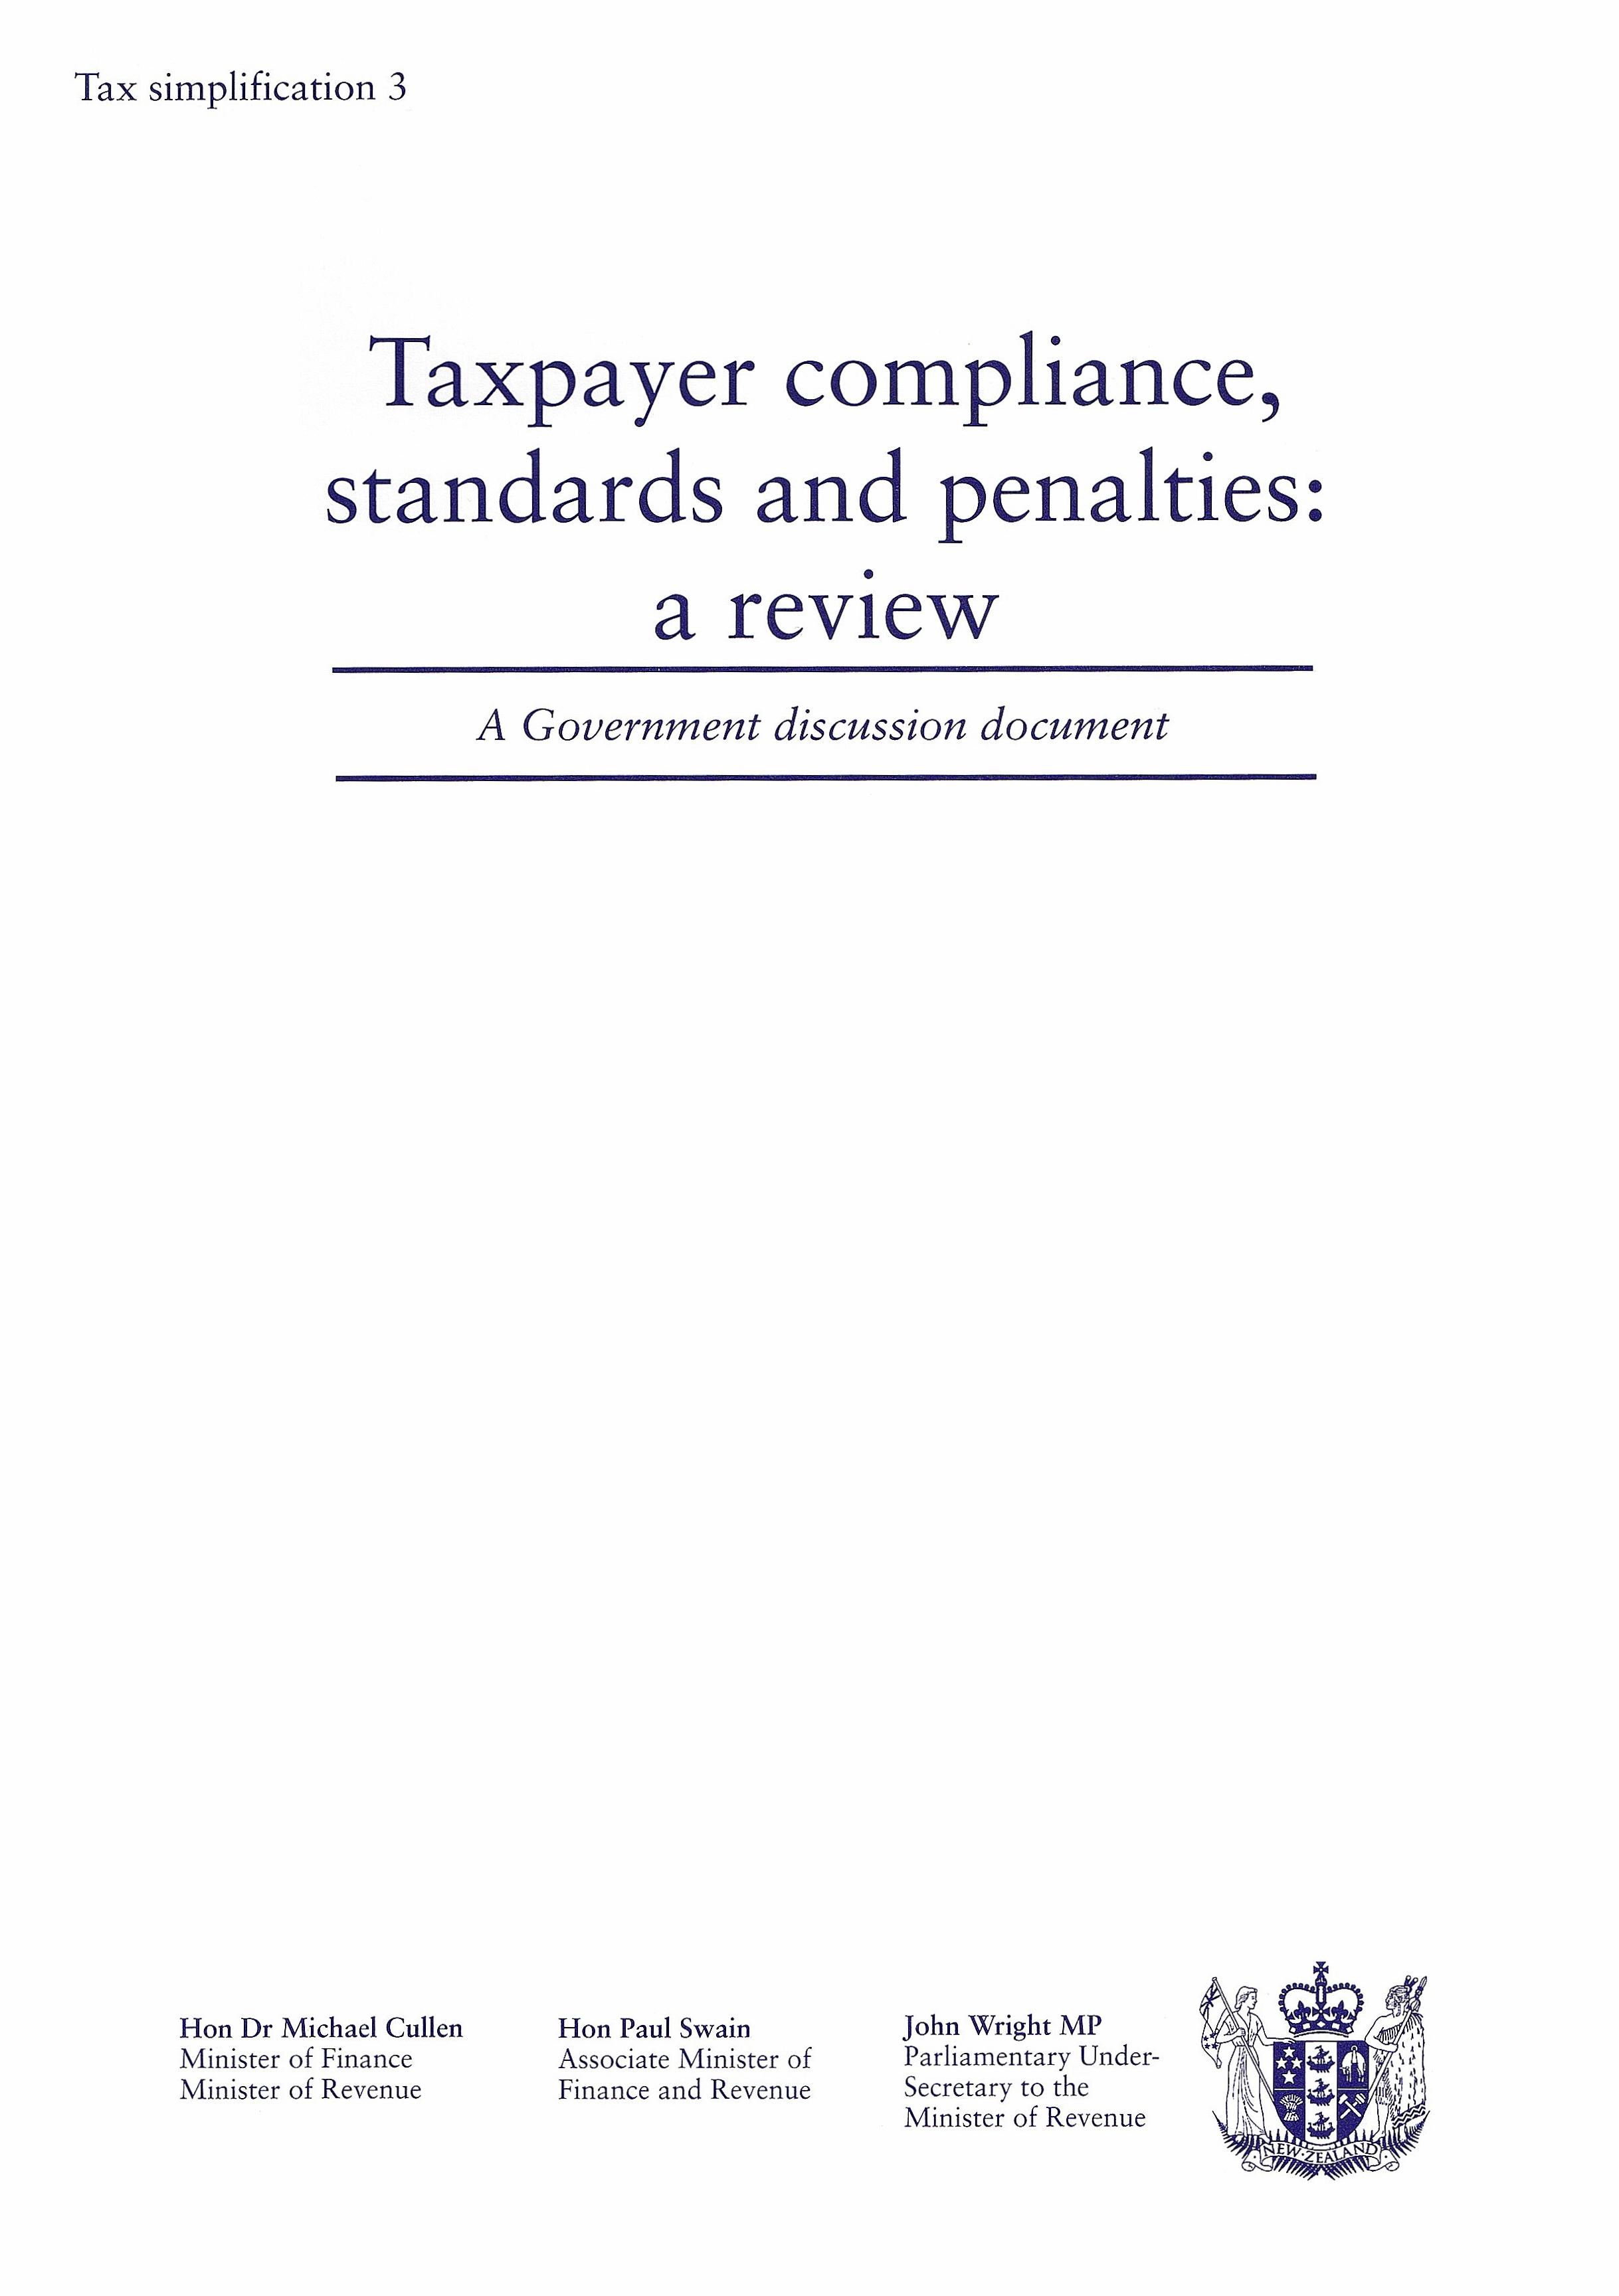 Publication cover image. Title = Taxpayer compliance, standards and penalties: a review - a Government discussion document. August 2001.